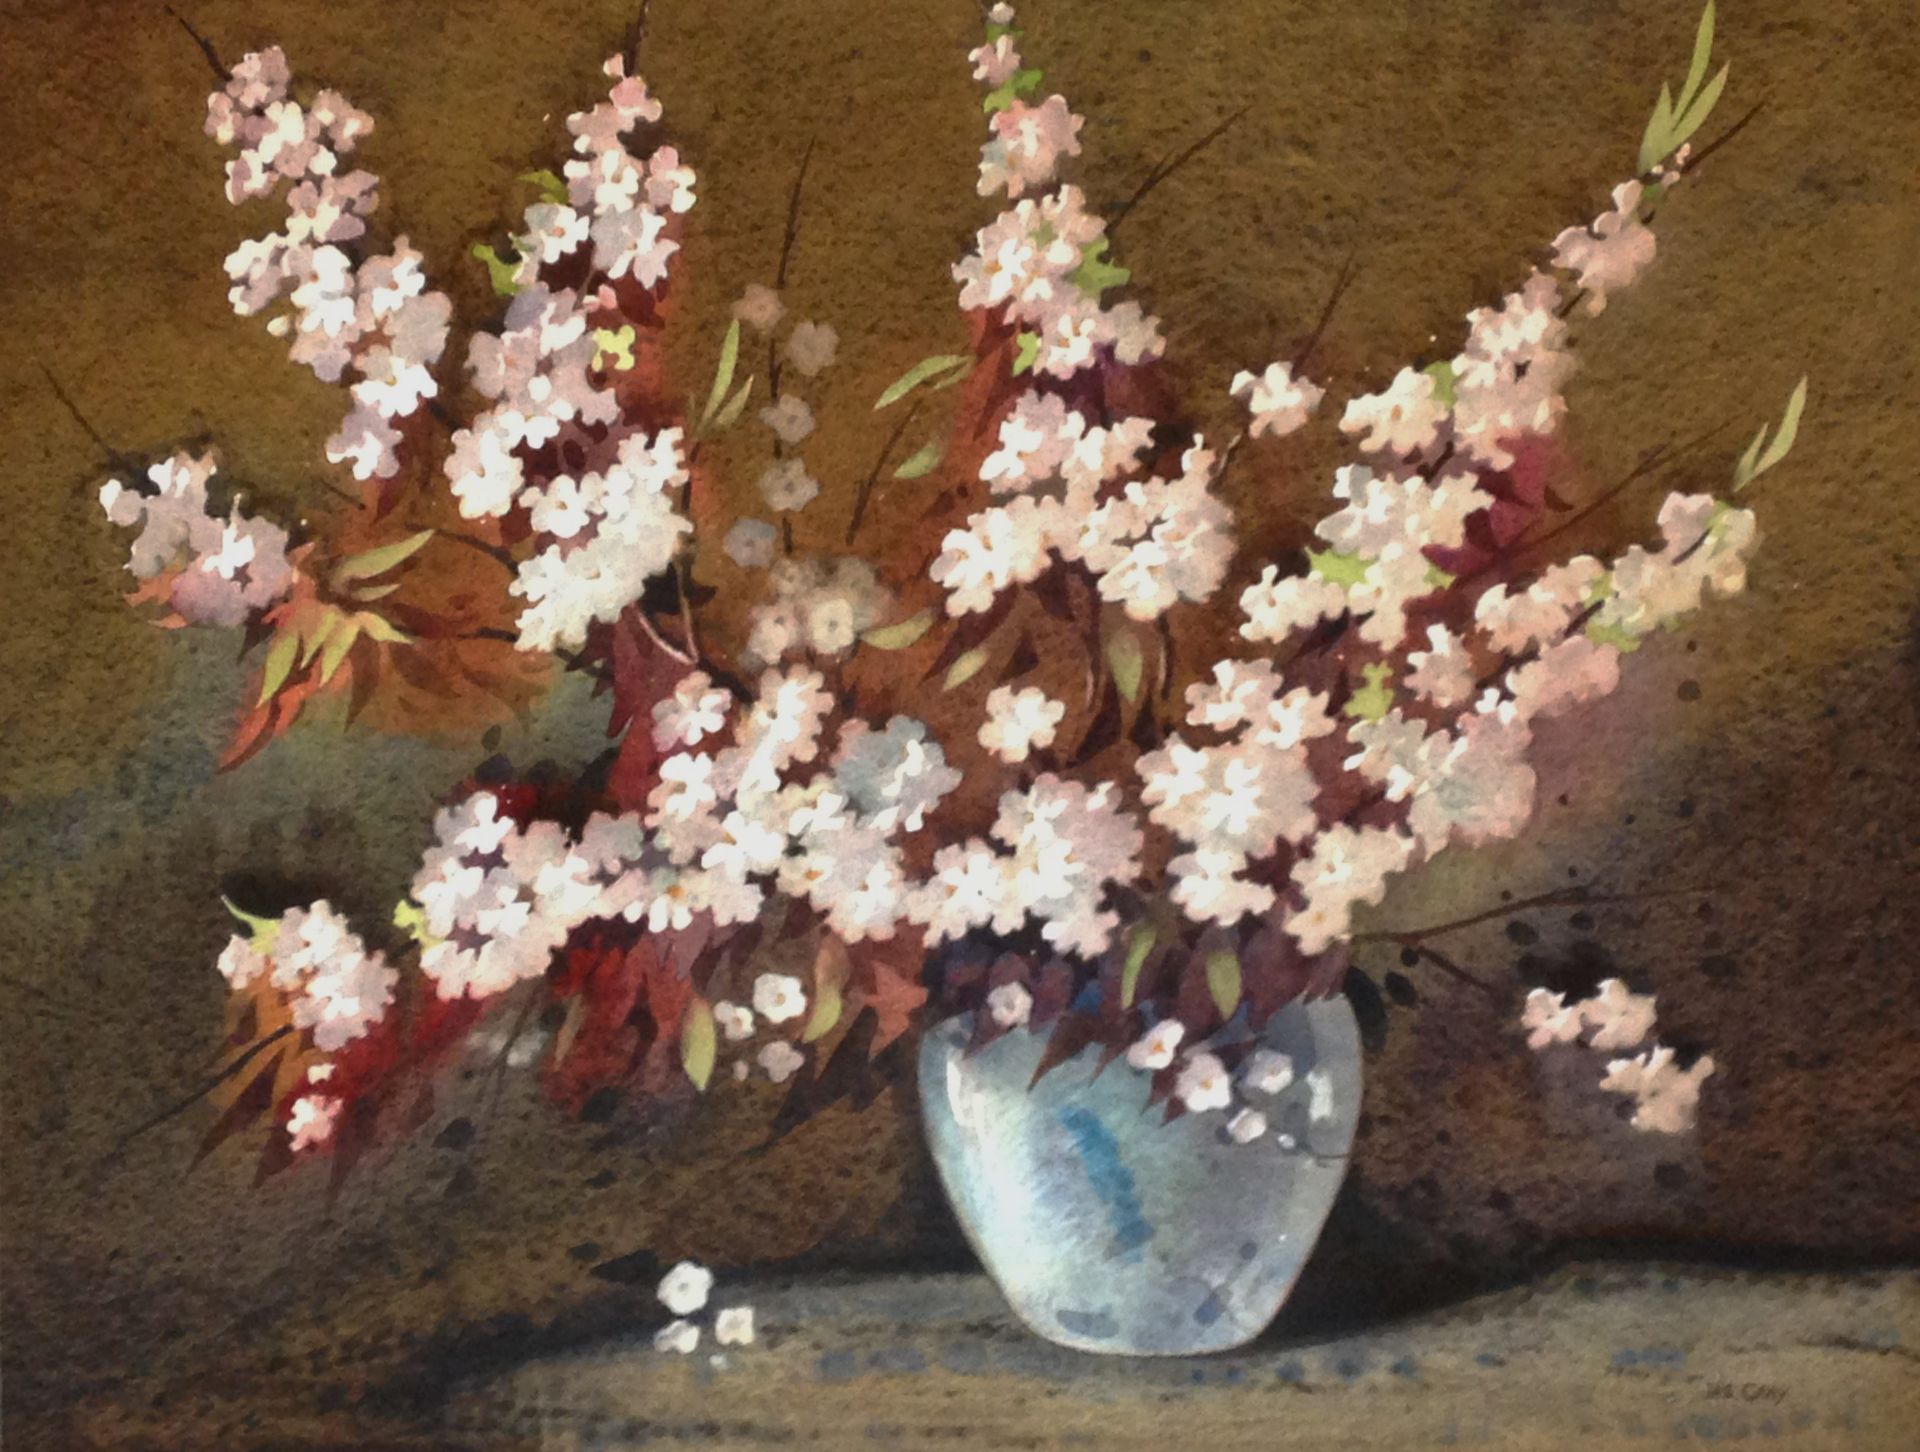 James Gray Scottish 1917-1947 large signed watercolour Cherry Blossom Title : Cherry Blossom